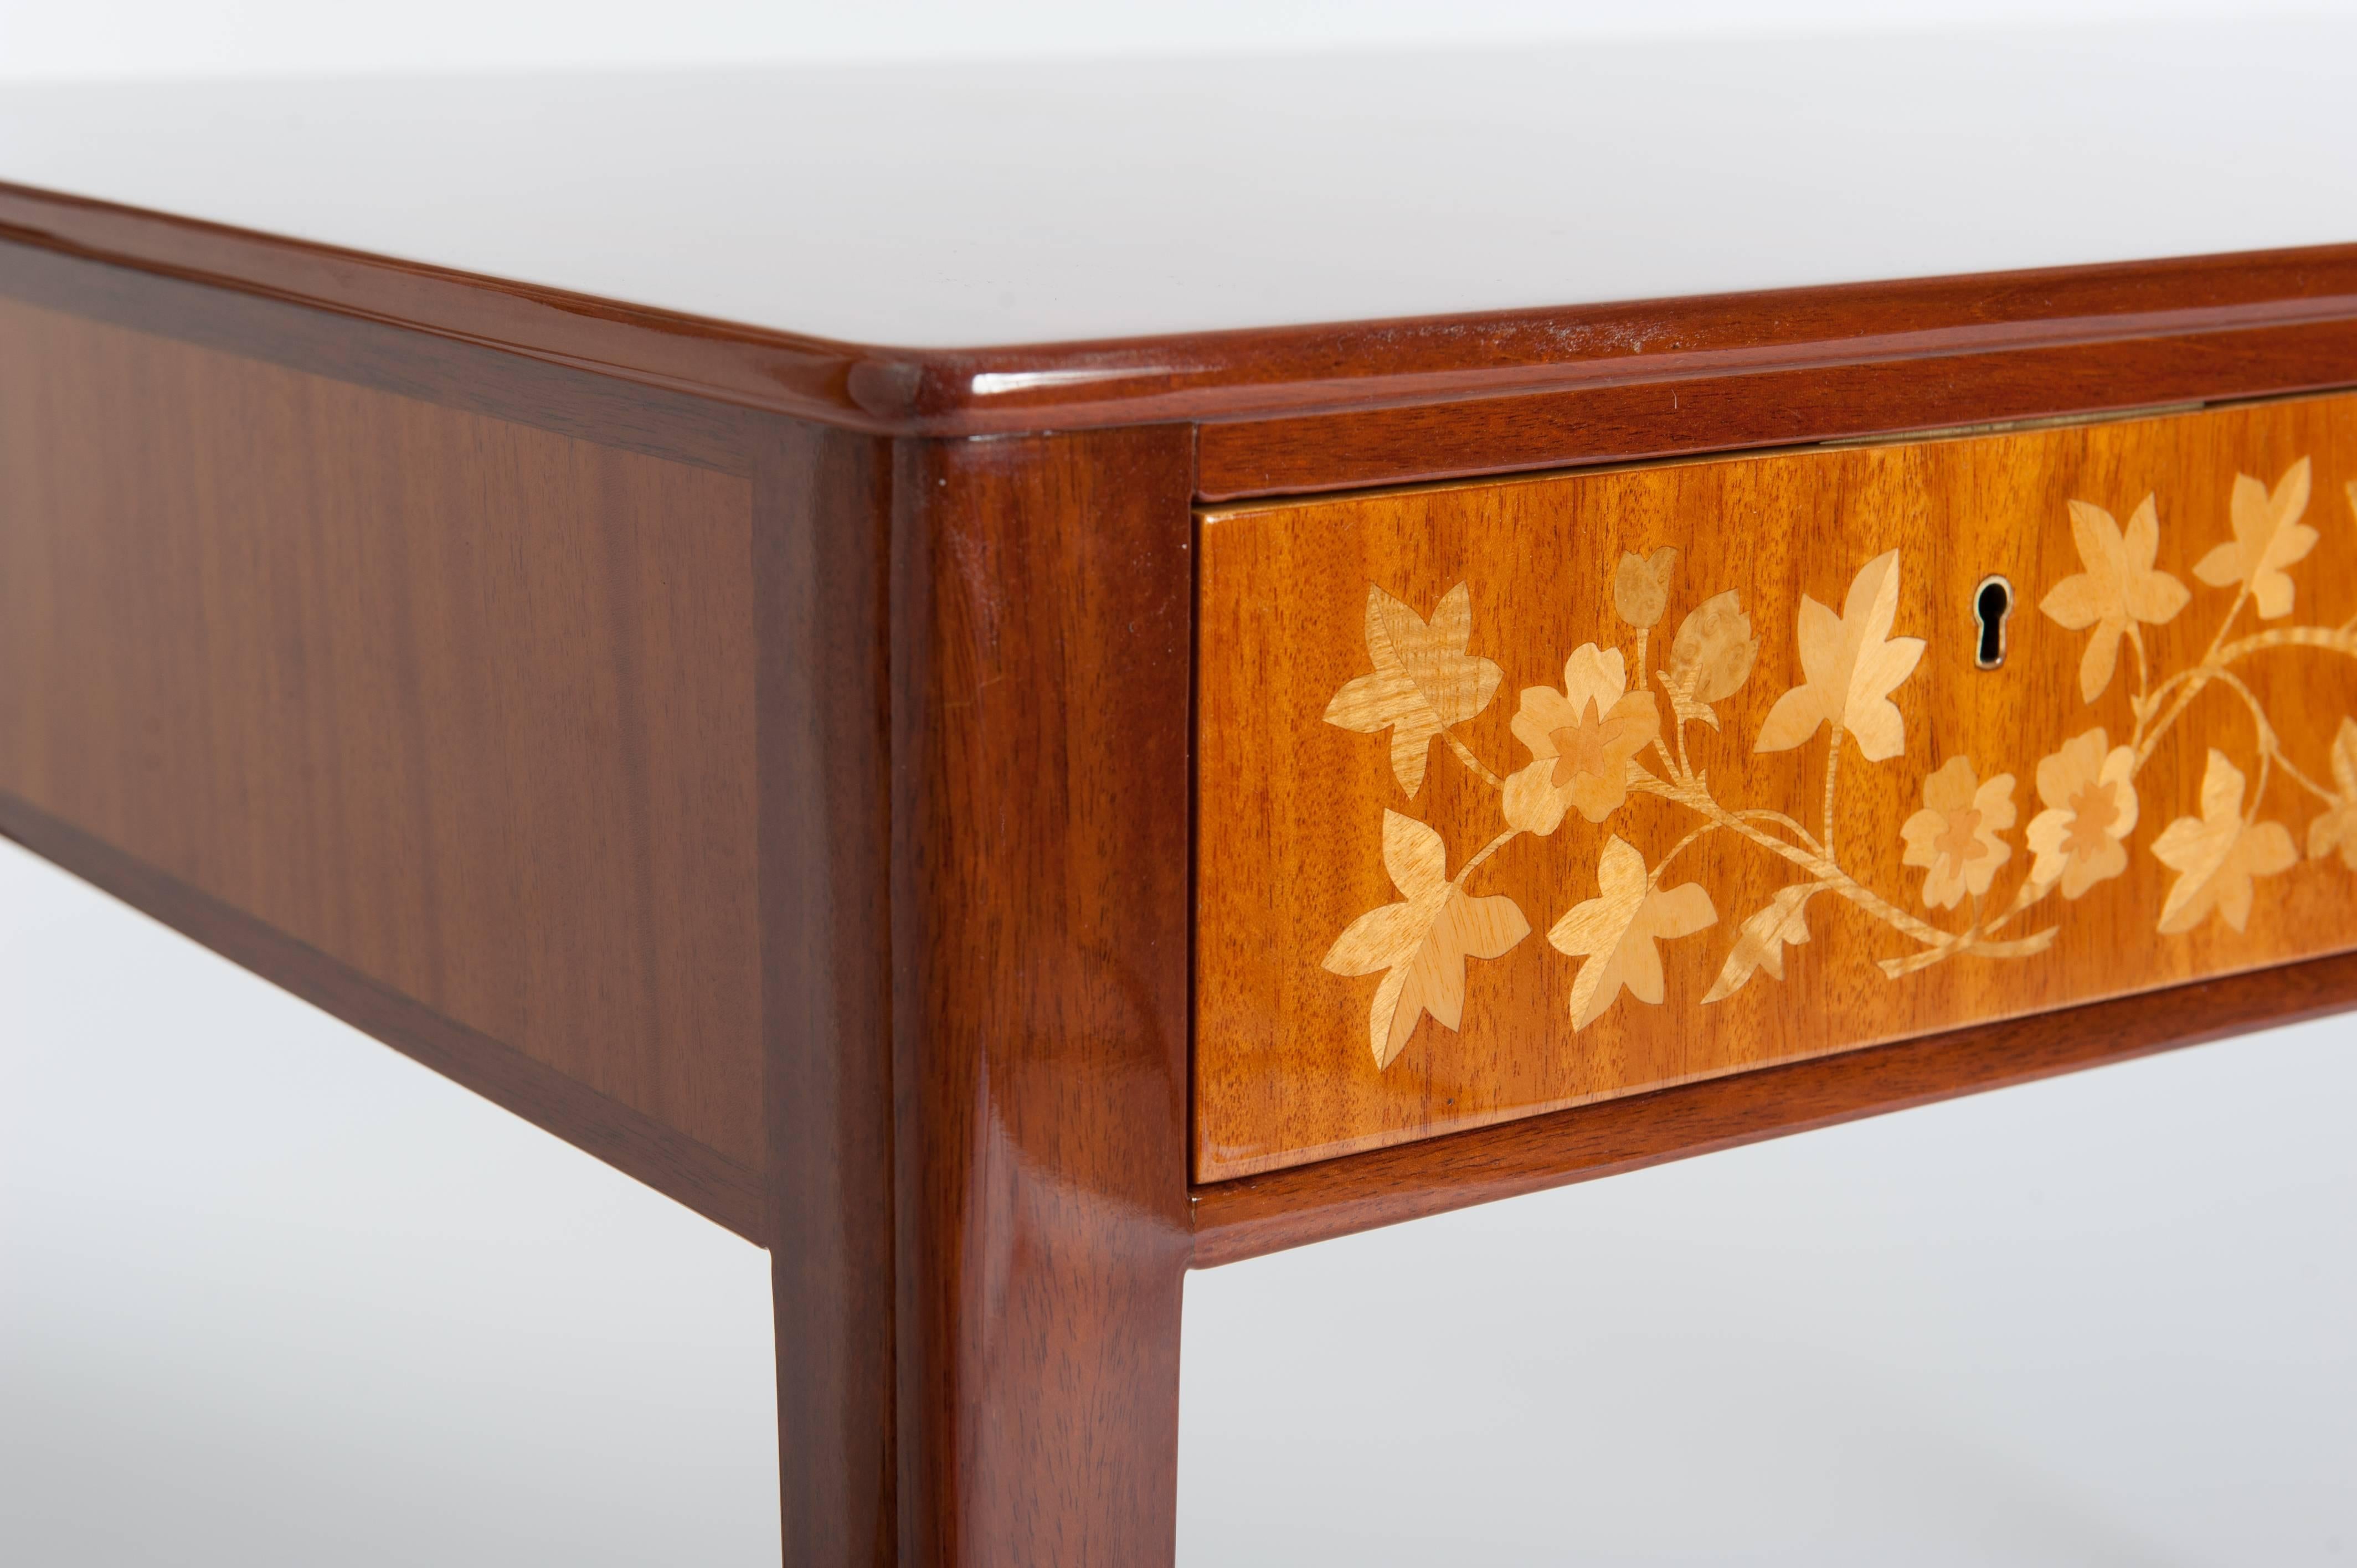 Hand-Crafted Swedish Carl Malmsten Desk Bright Mahogany Wood with Marquetry from the 1930s